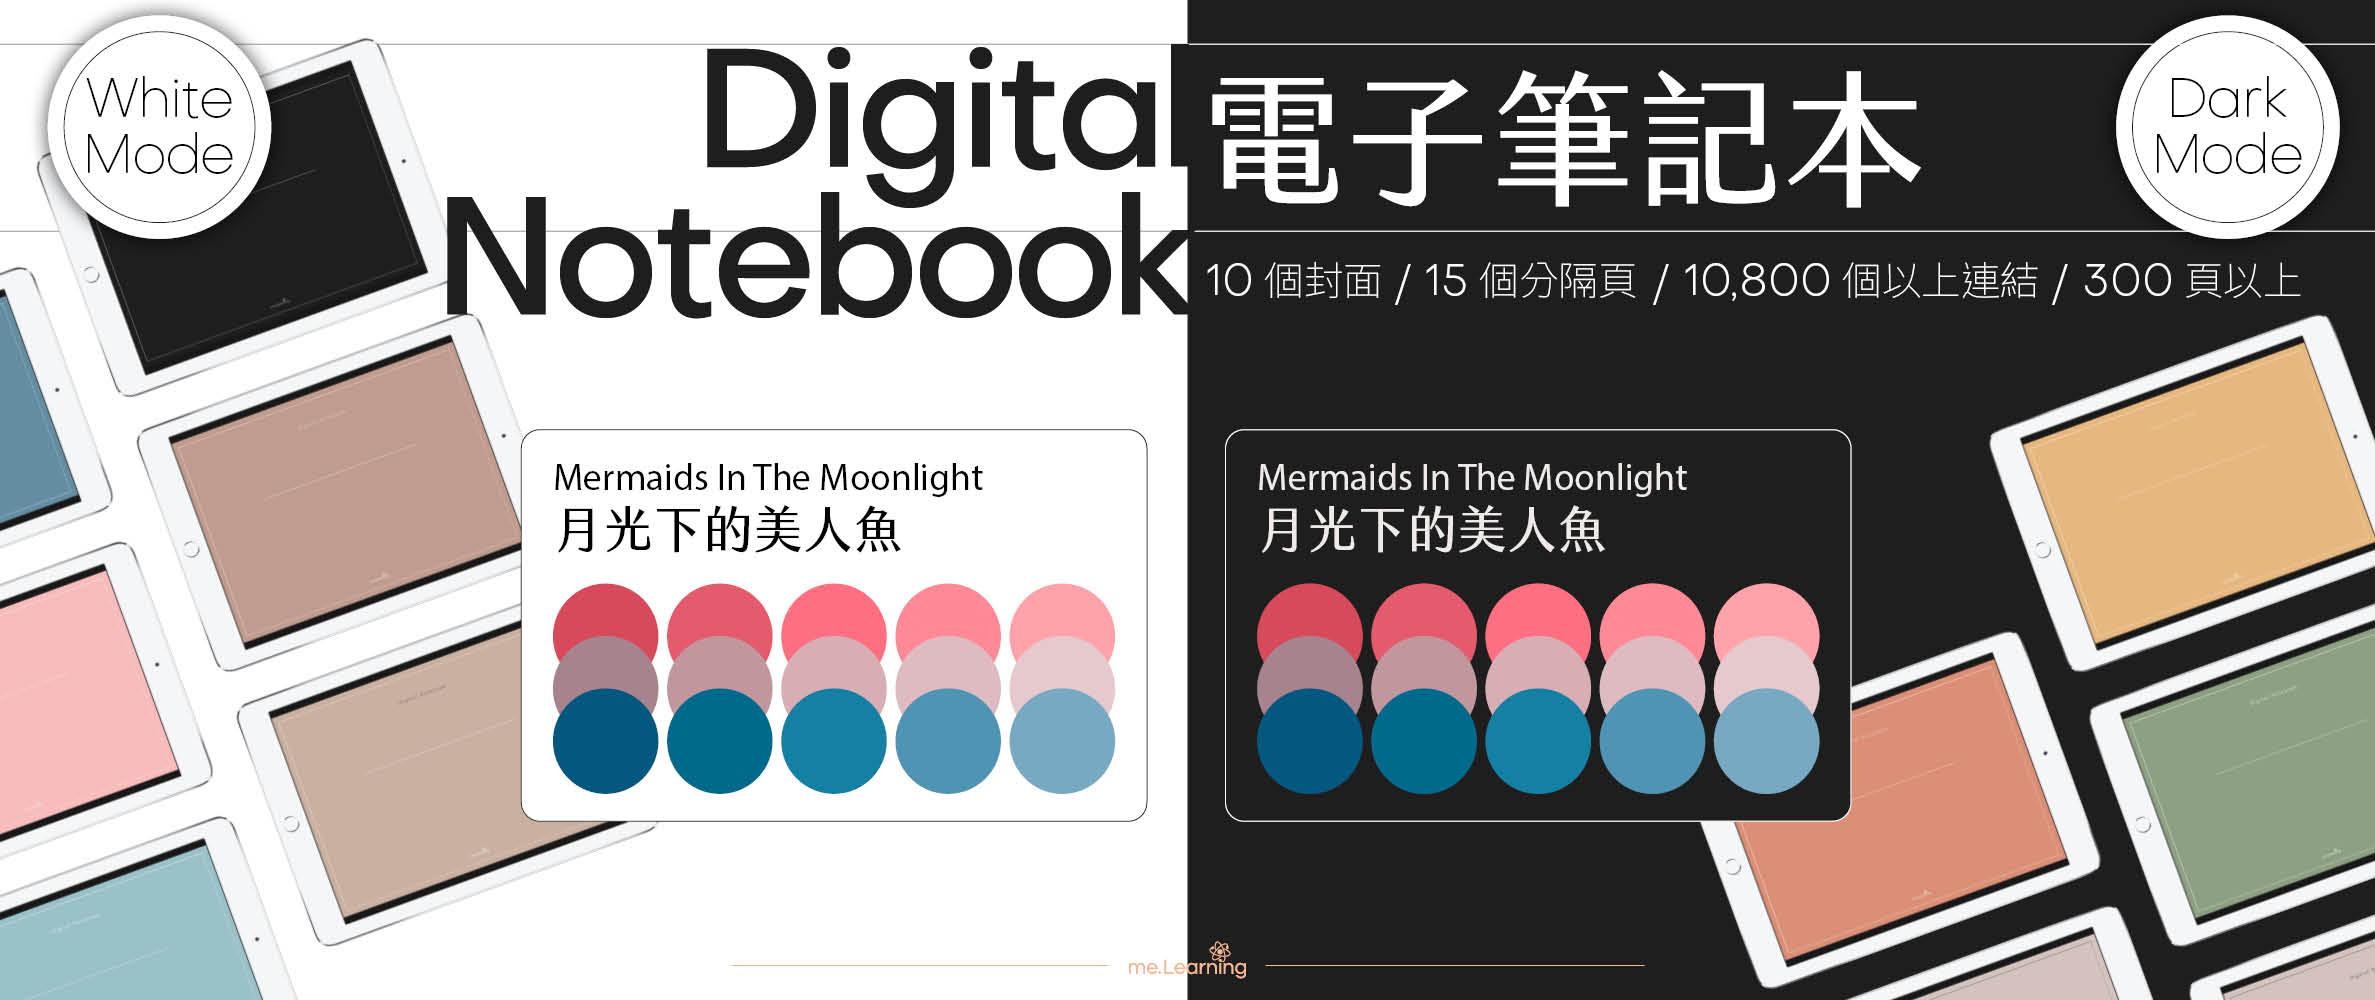 Notebook-Landscape-Solid Color Cover-15 Tabs-Mermaids In The Moonlight-White Mode 不想念書時上市 | me.Learning